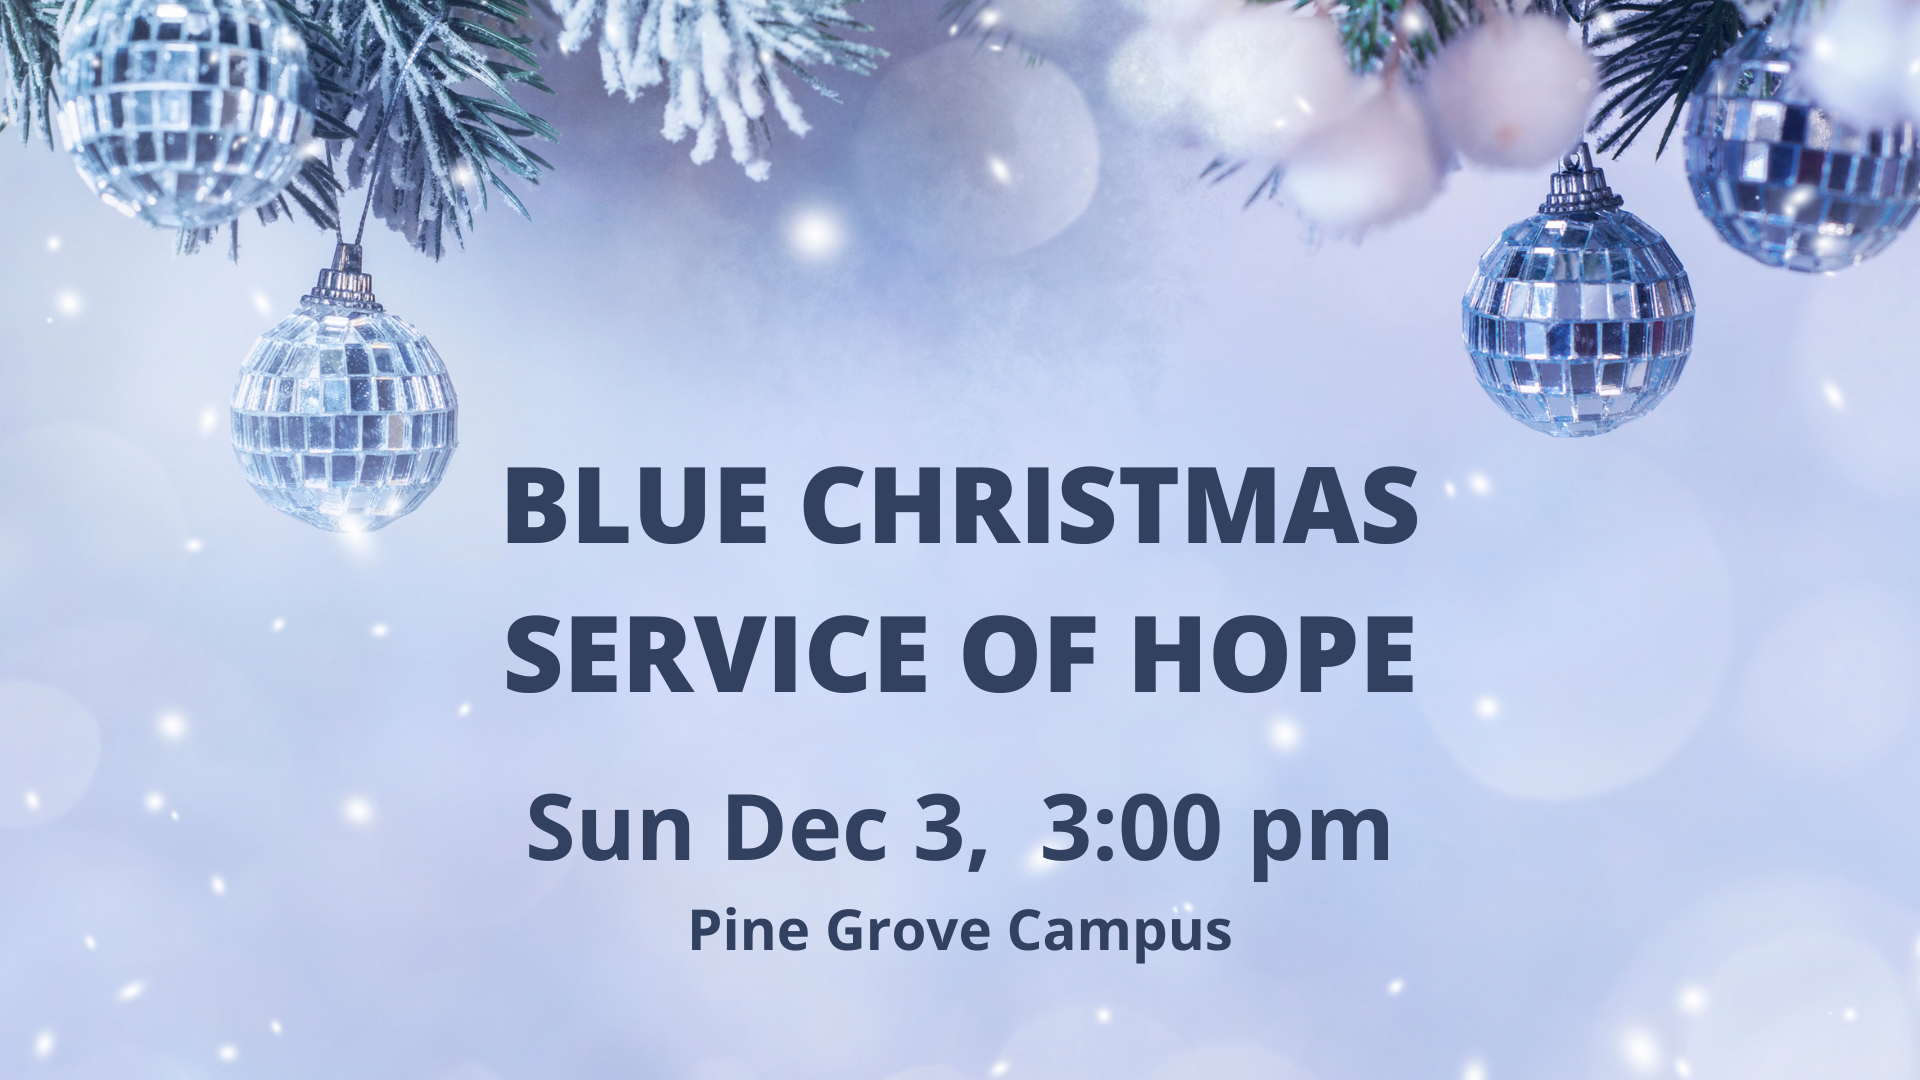 BLUE CHRISTMAS SERVICE OF HOPE 2023 (1920 × 1080 px) image